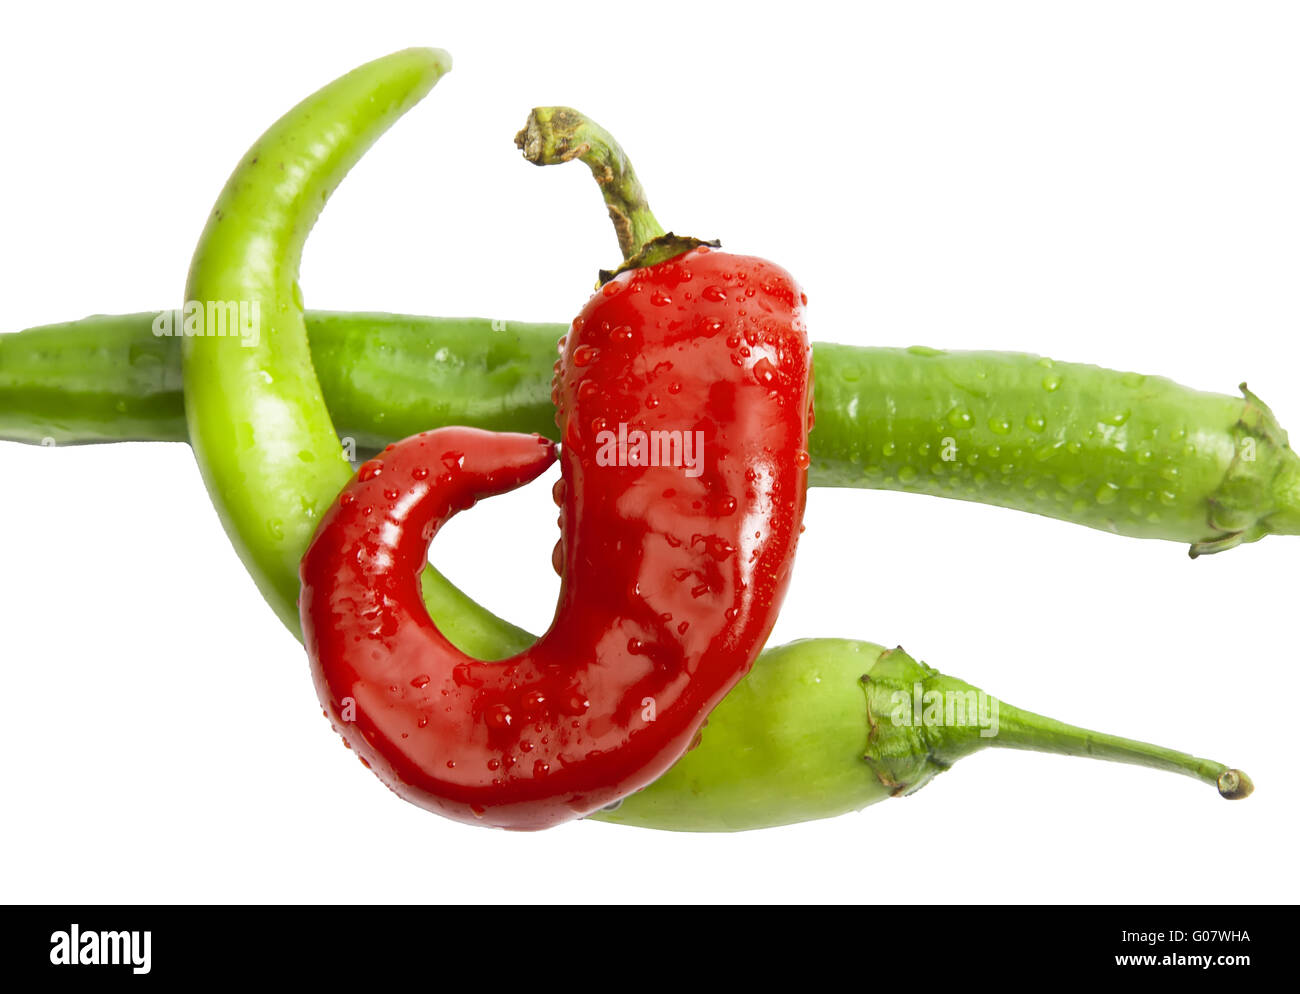 Straight green pepper and small red chili pepper Stock Photo